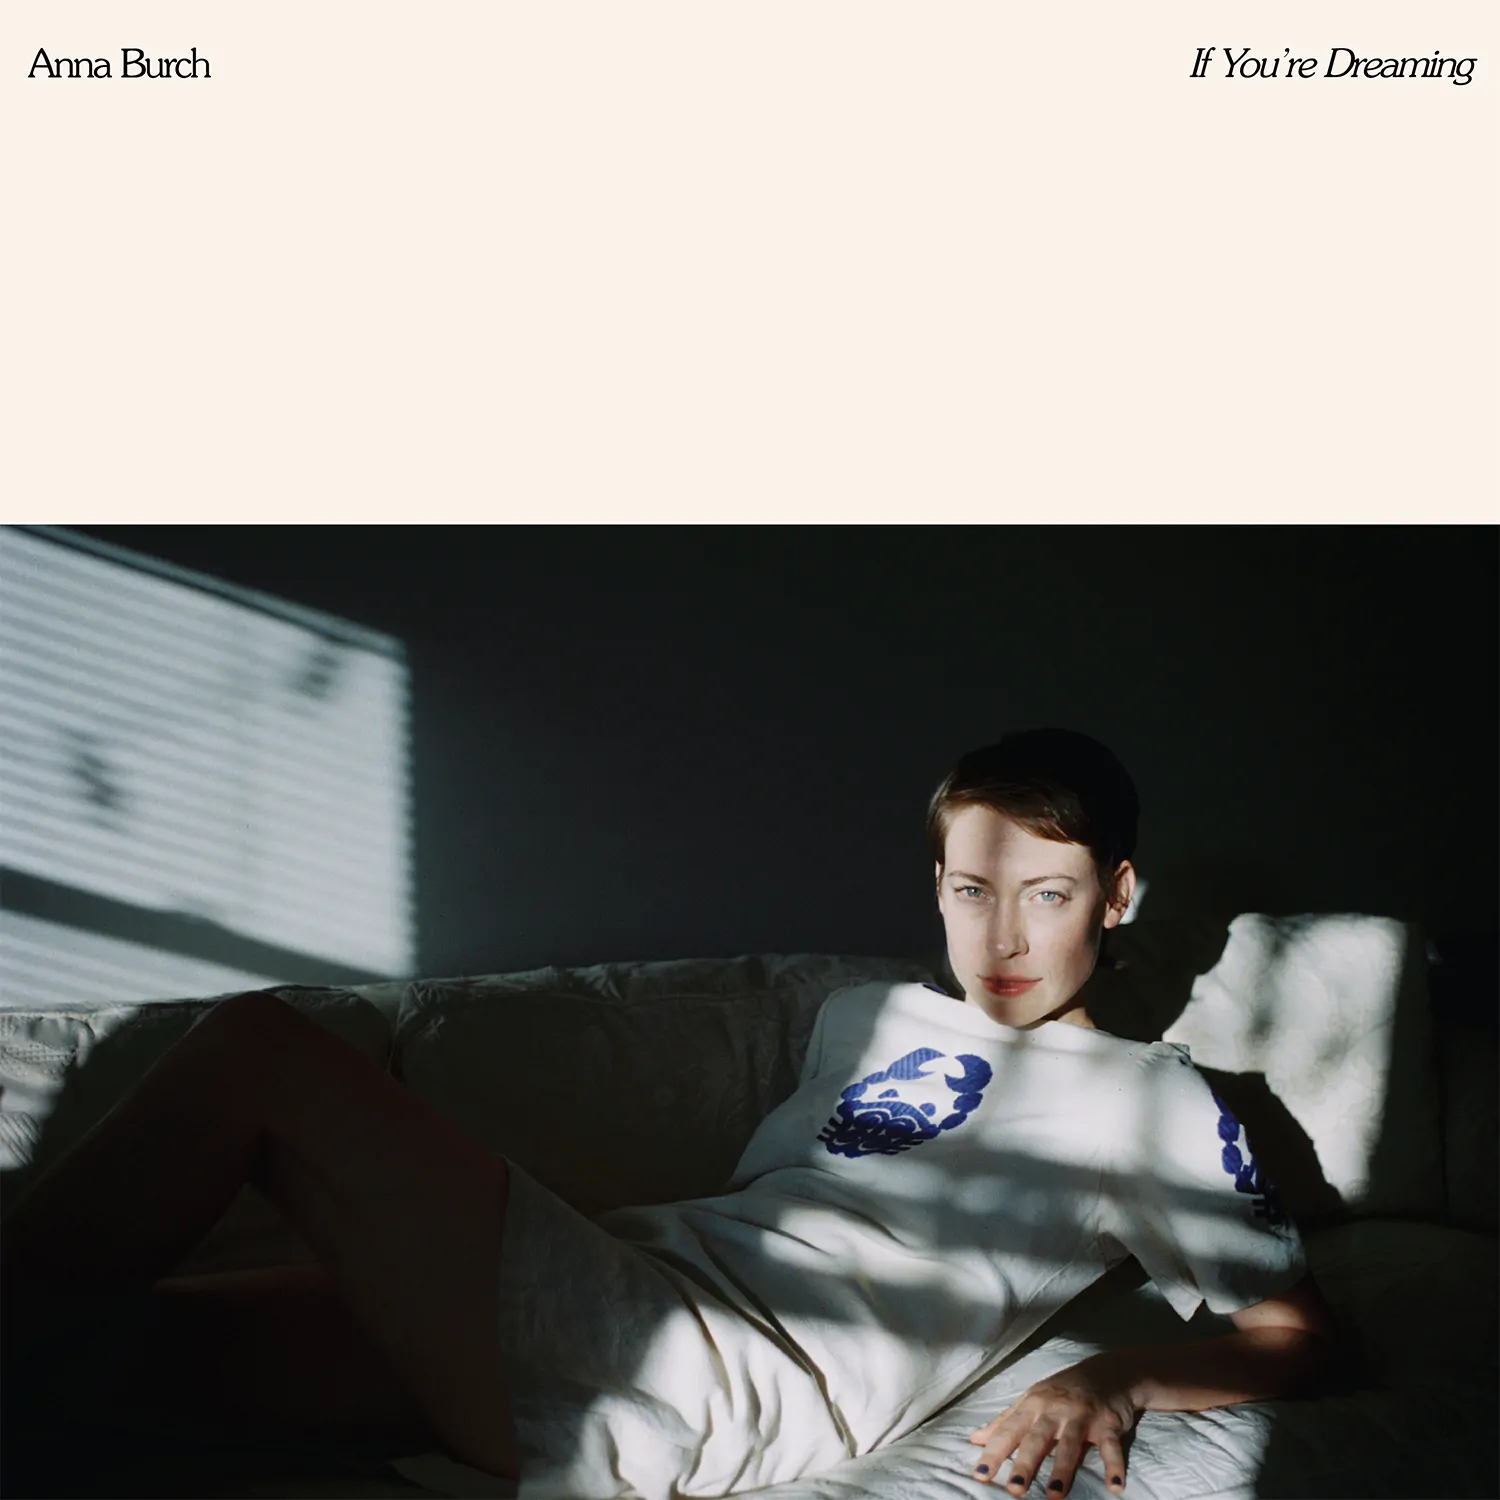 ALBUM REVIEW: Anna Burch – If You’re Dreaming